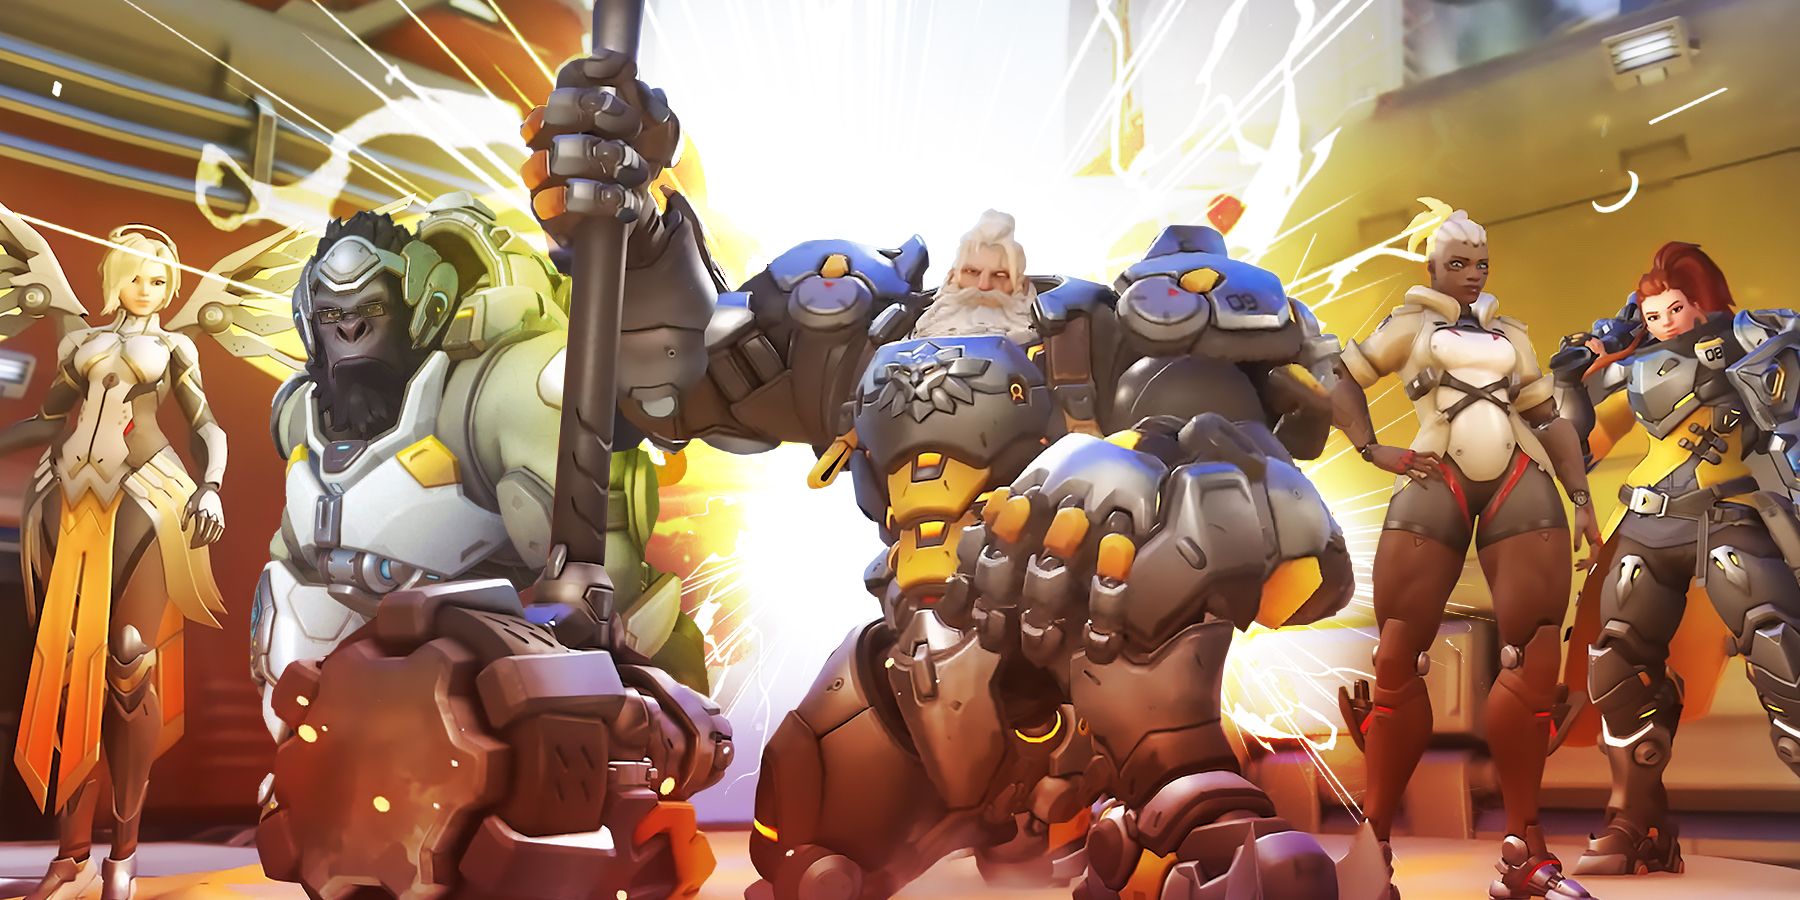 Sojourn, Mercy, Reinhardt, Brigitte, and winston are amongst the 12 easiest heroes to play in Overwatch 2